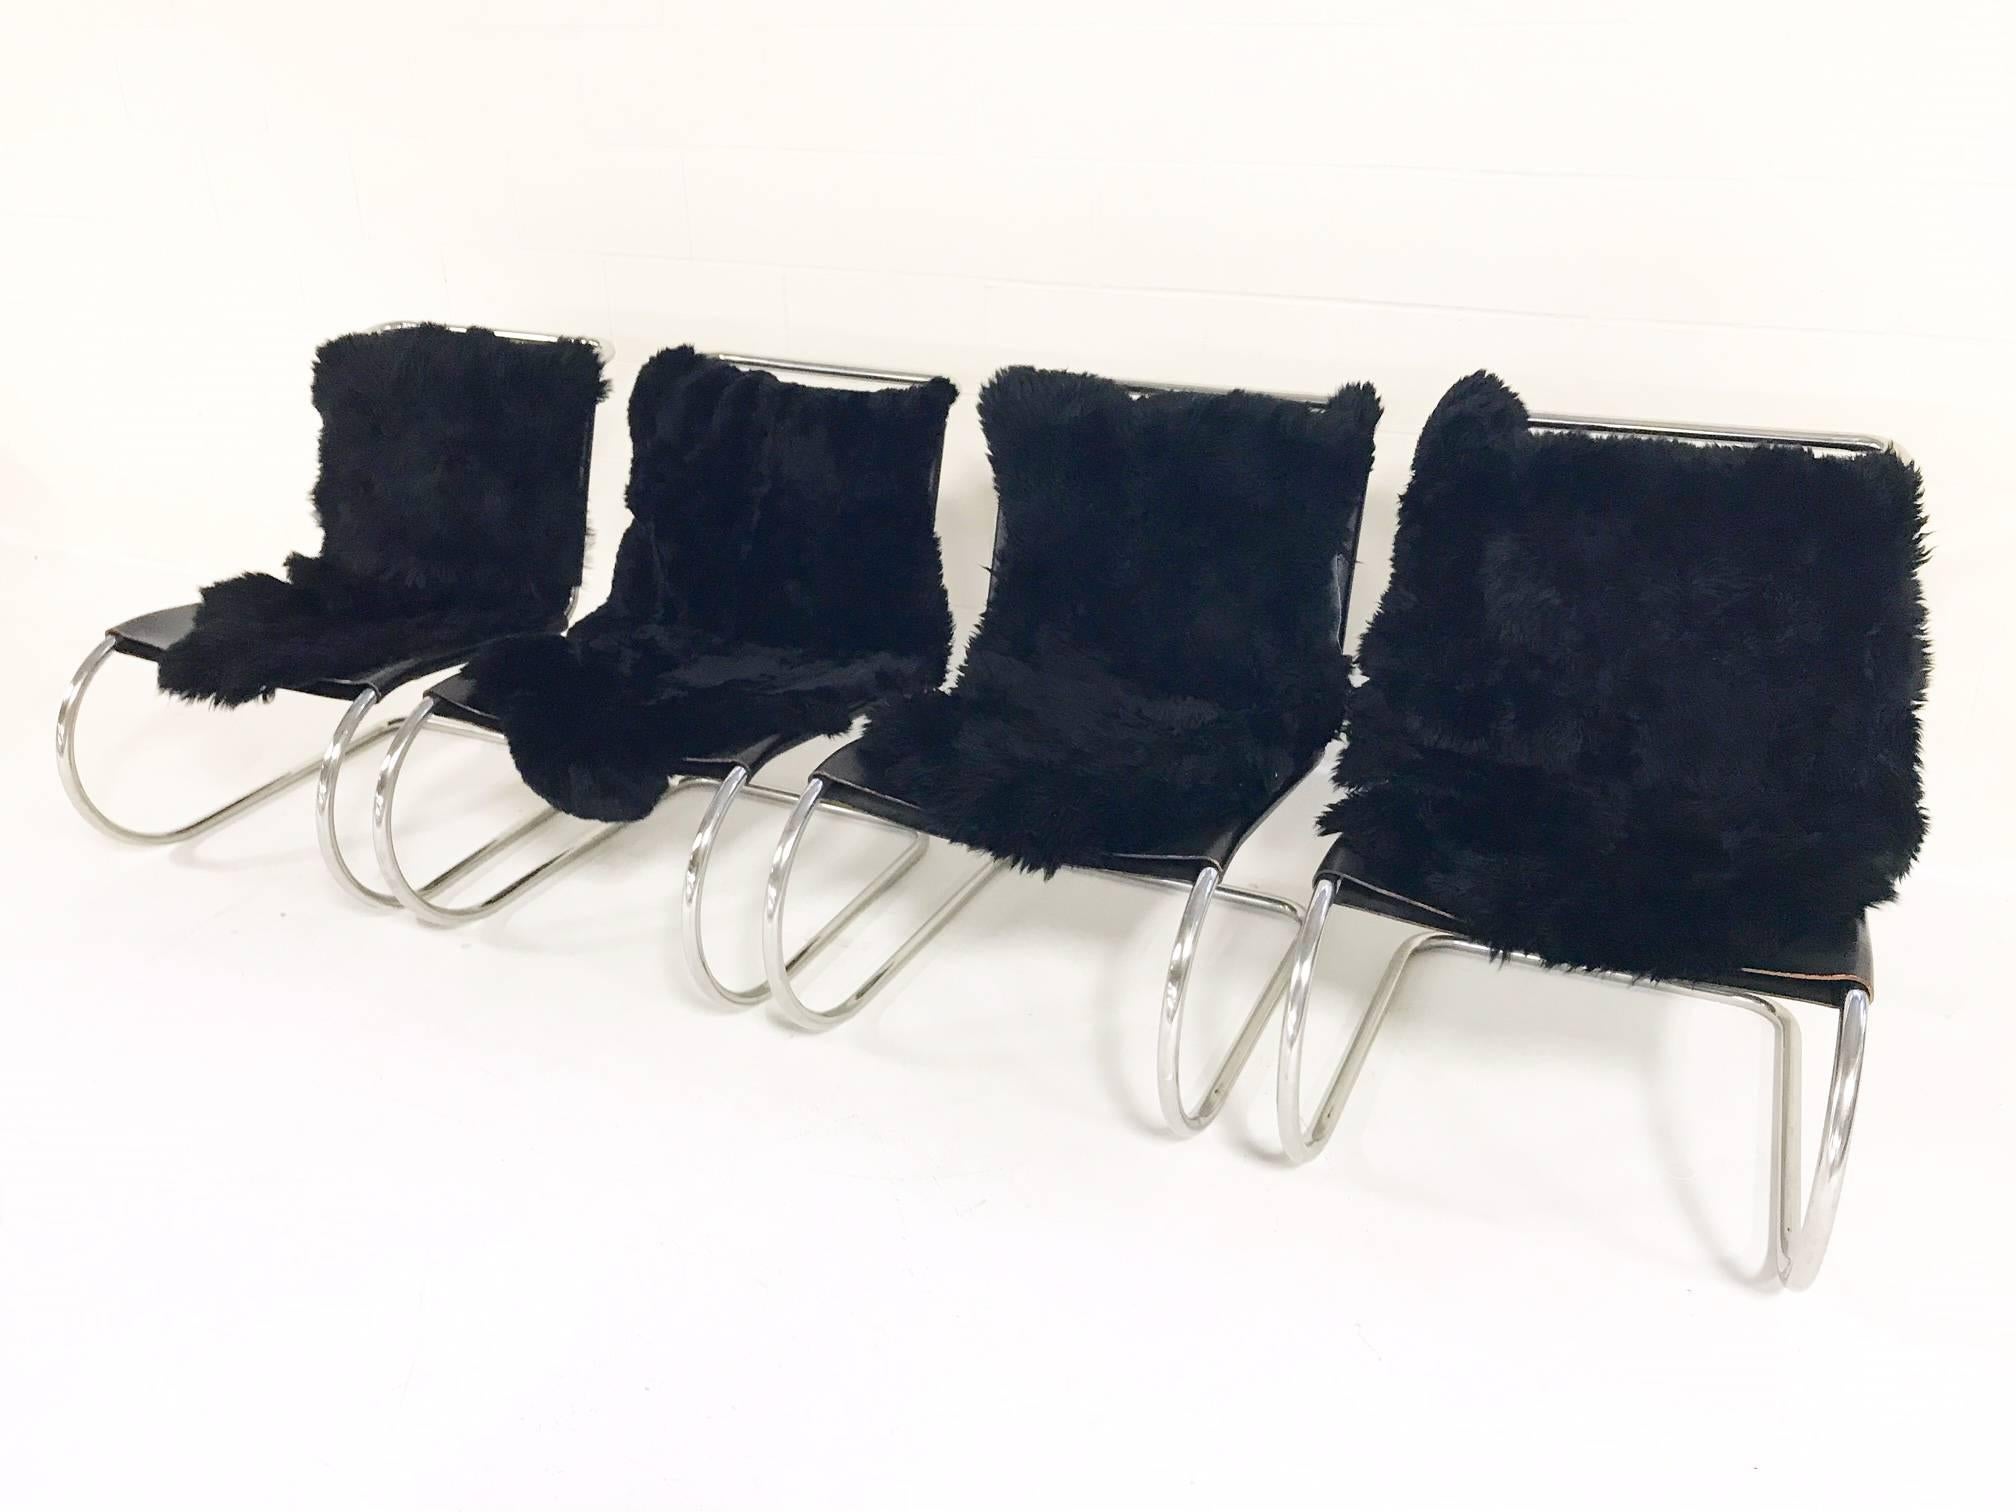 What an icon! The MR chair designed by Mies Van Der Rohe is an instantly recognizable design. We collected this group of four MR Chairs at auction. They are in excellent vintage condition. We added four cozy, rustic black Brazilian sheepskins for a